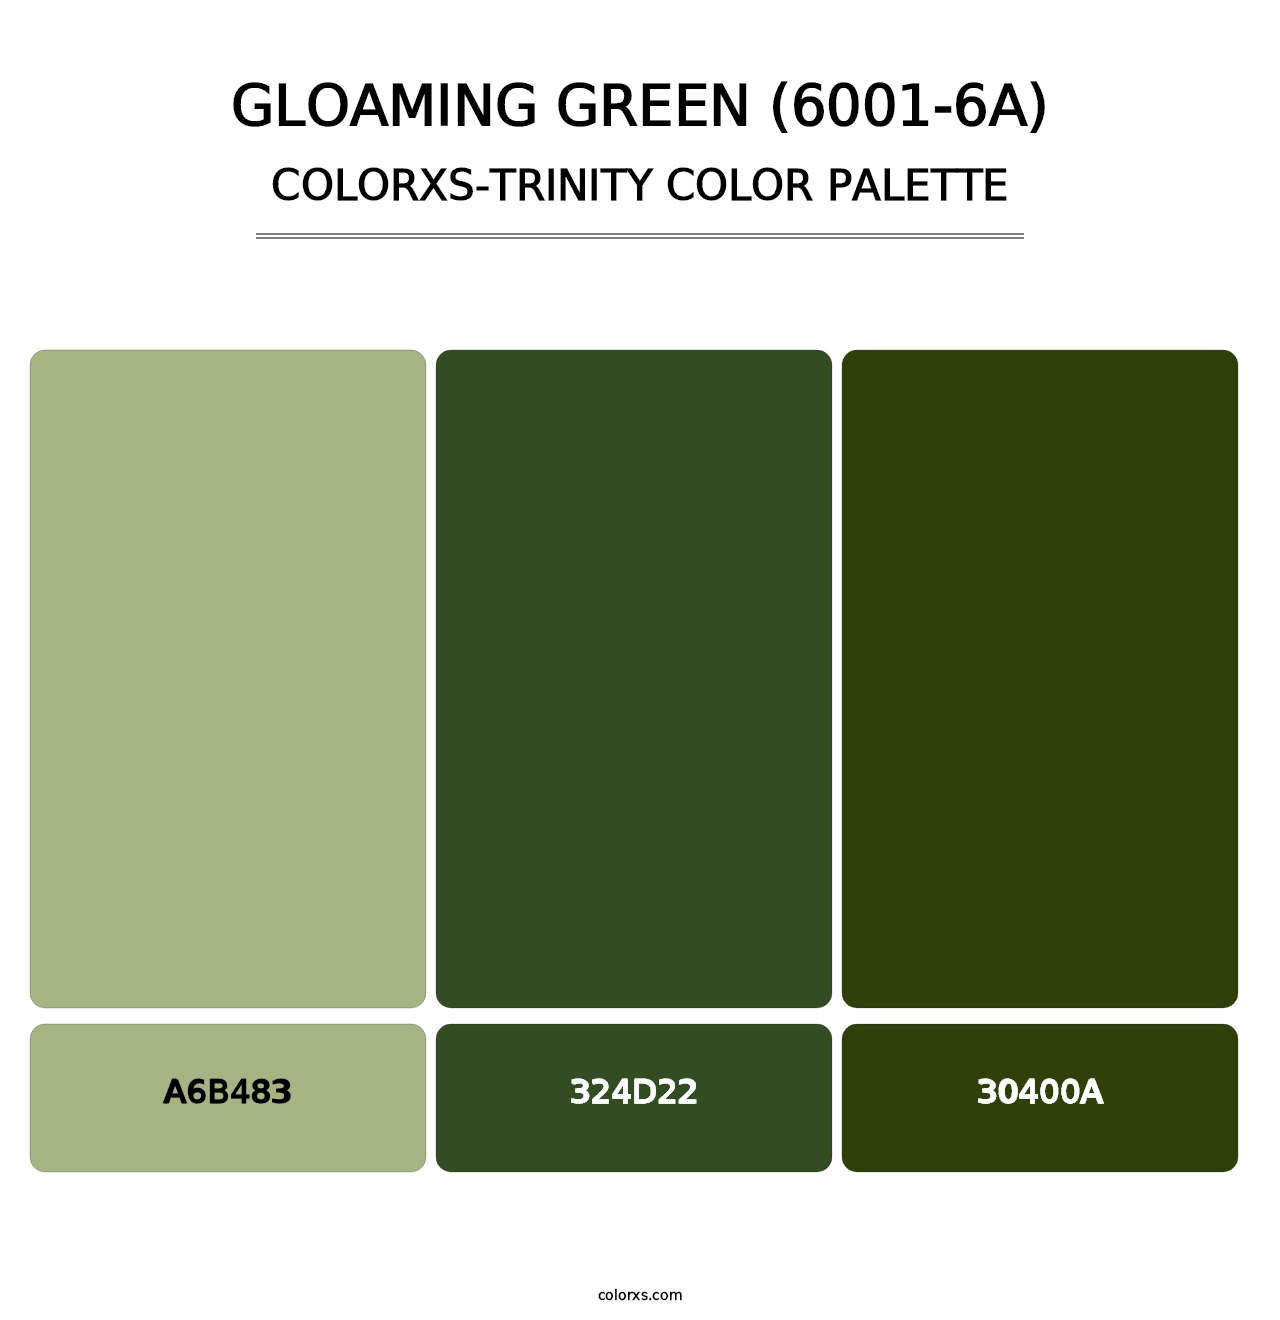 Gloaming Green (6001-6A) - Colorxs Trinity Palette